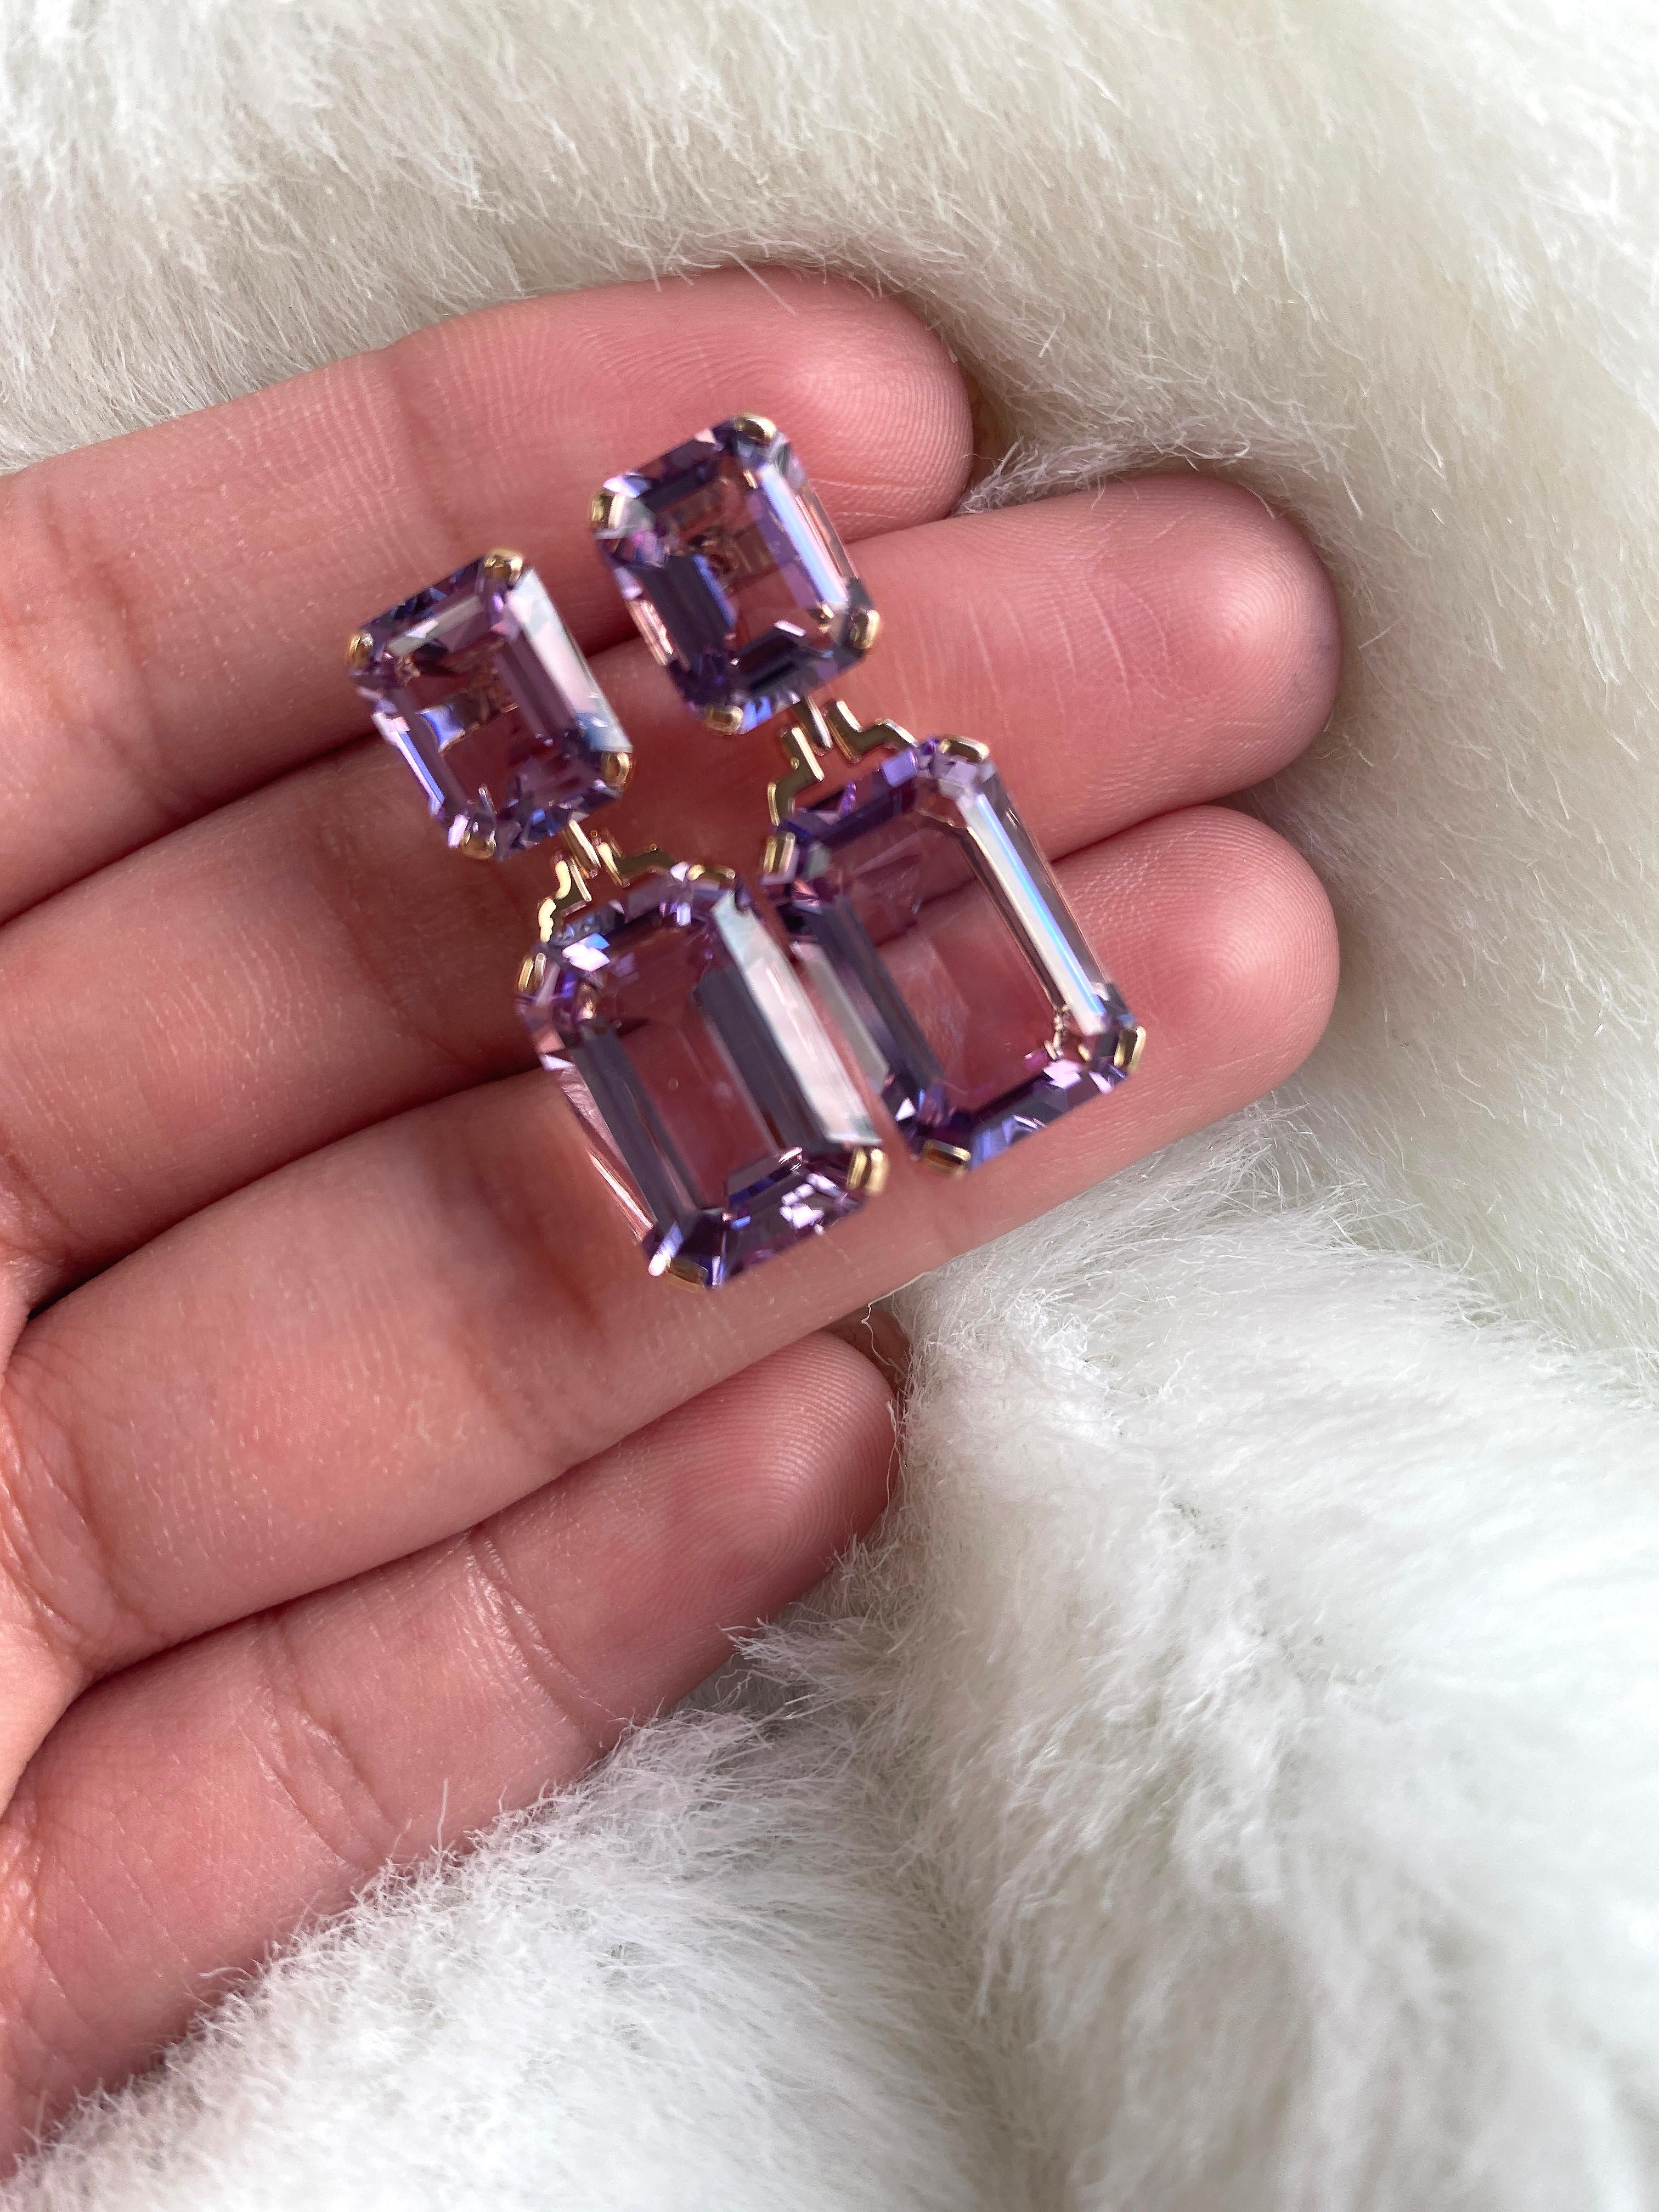 These Lavender Amethyst Double Emerald Cut Earrings in 18K Rose Gold from the 'Gossip' Collection are a stunning and unexpected accessory. With their unique lavender hue and double emerald cut design, these earrings are sure to catch the eye and